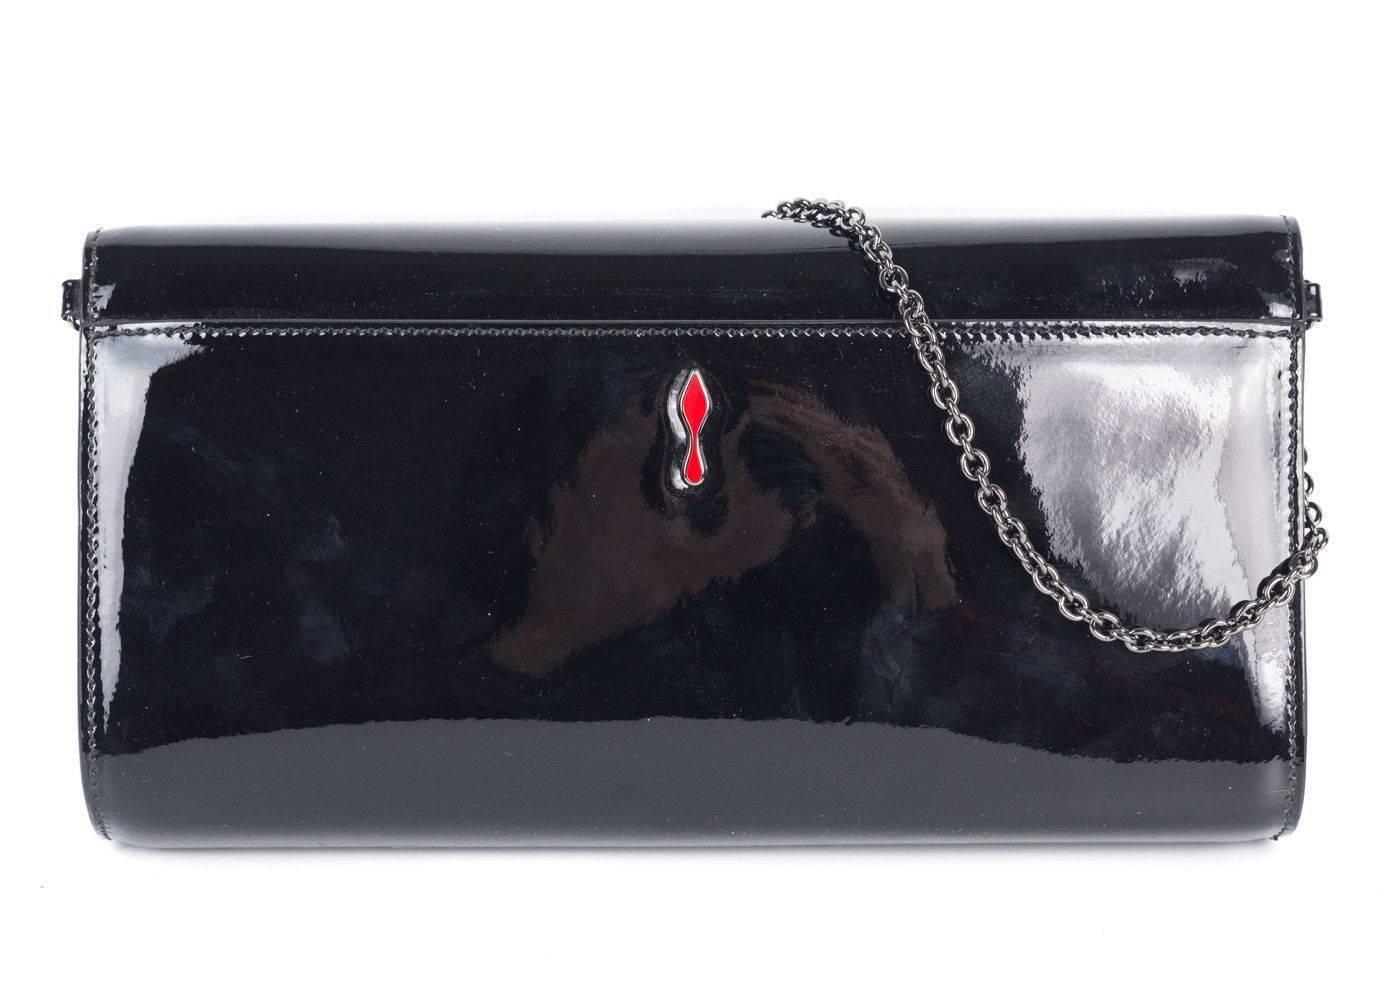 Brand New Christian Louboutin Rivera Clutch
Original Tags & Dust Bag Included
Retails In-Stores & Online for $1500
Dimensions: 10